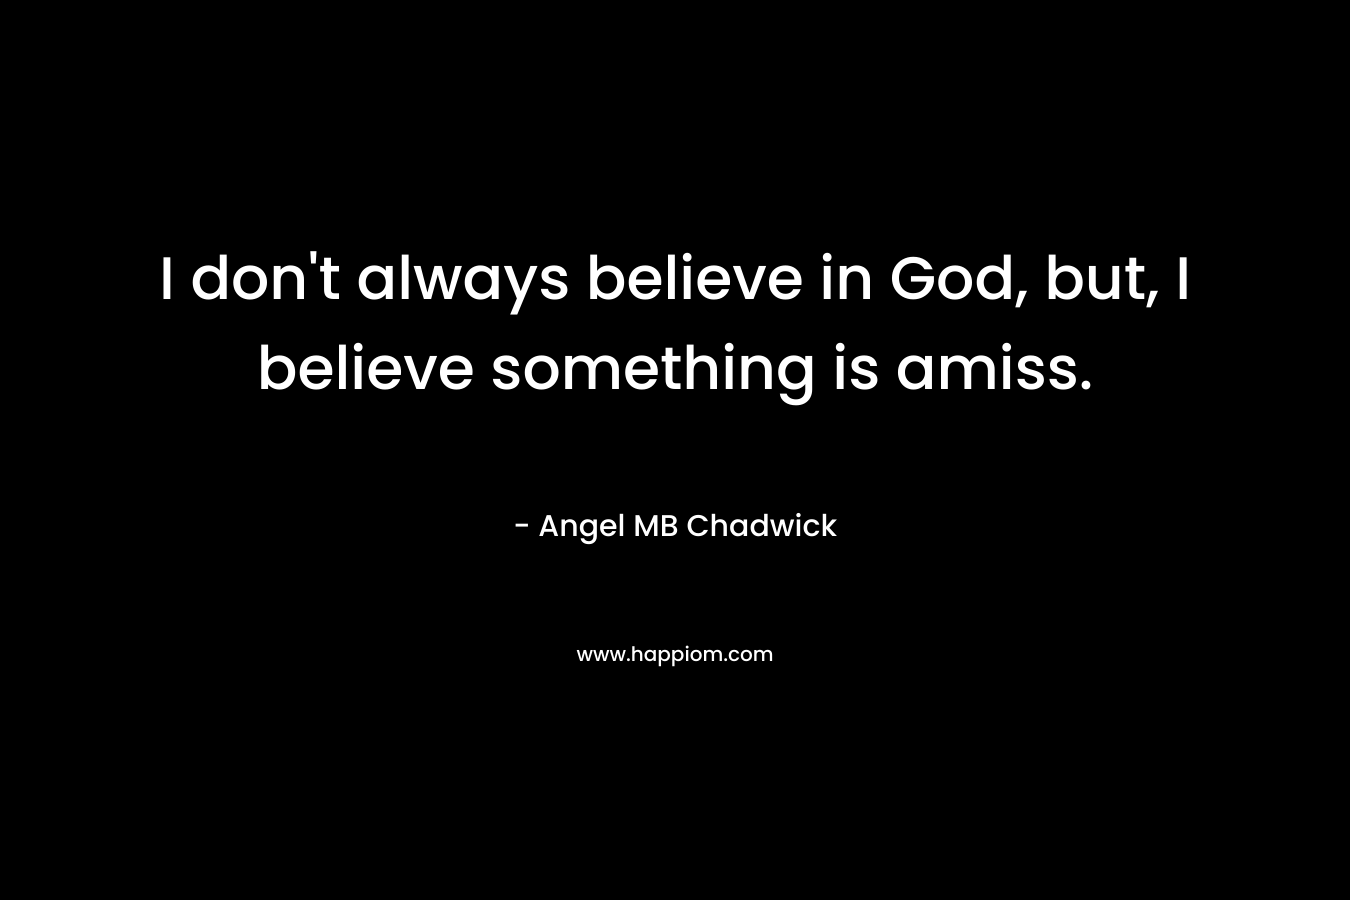 I don't always believe in God, but, I believe something is amiss.